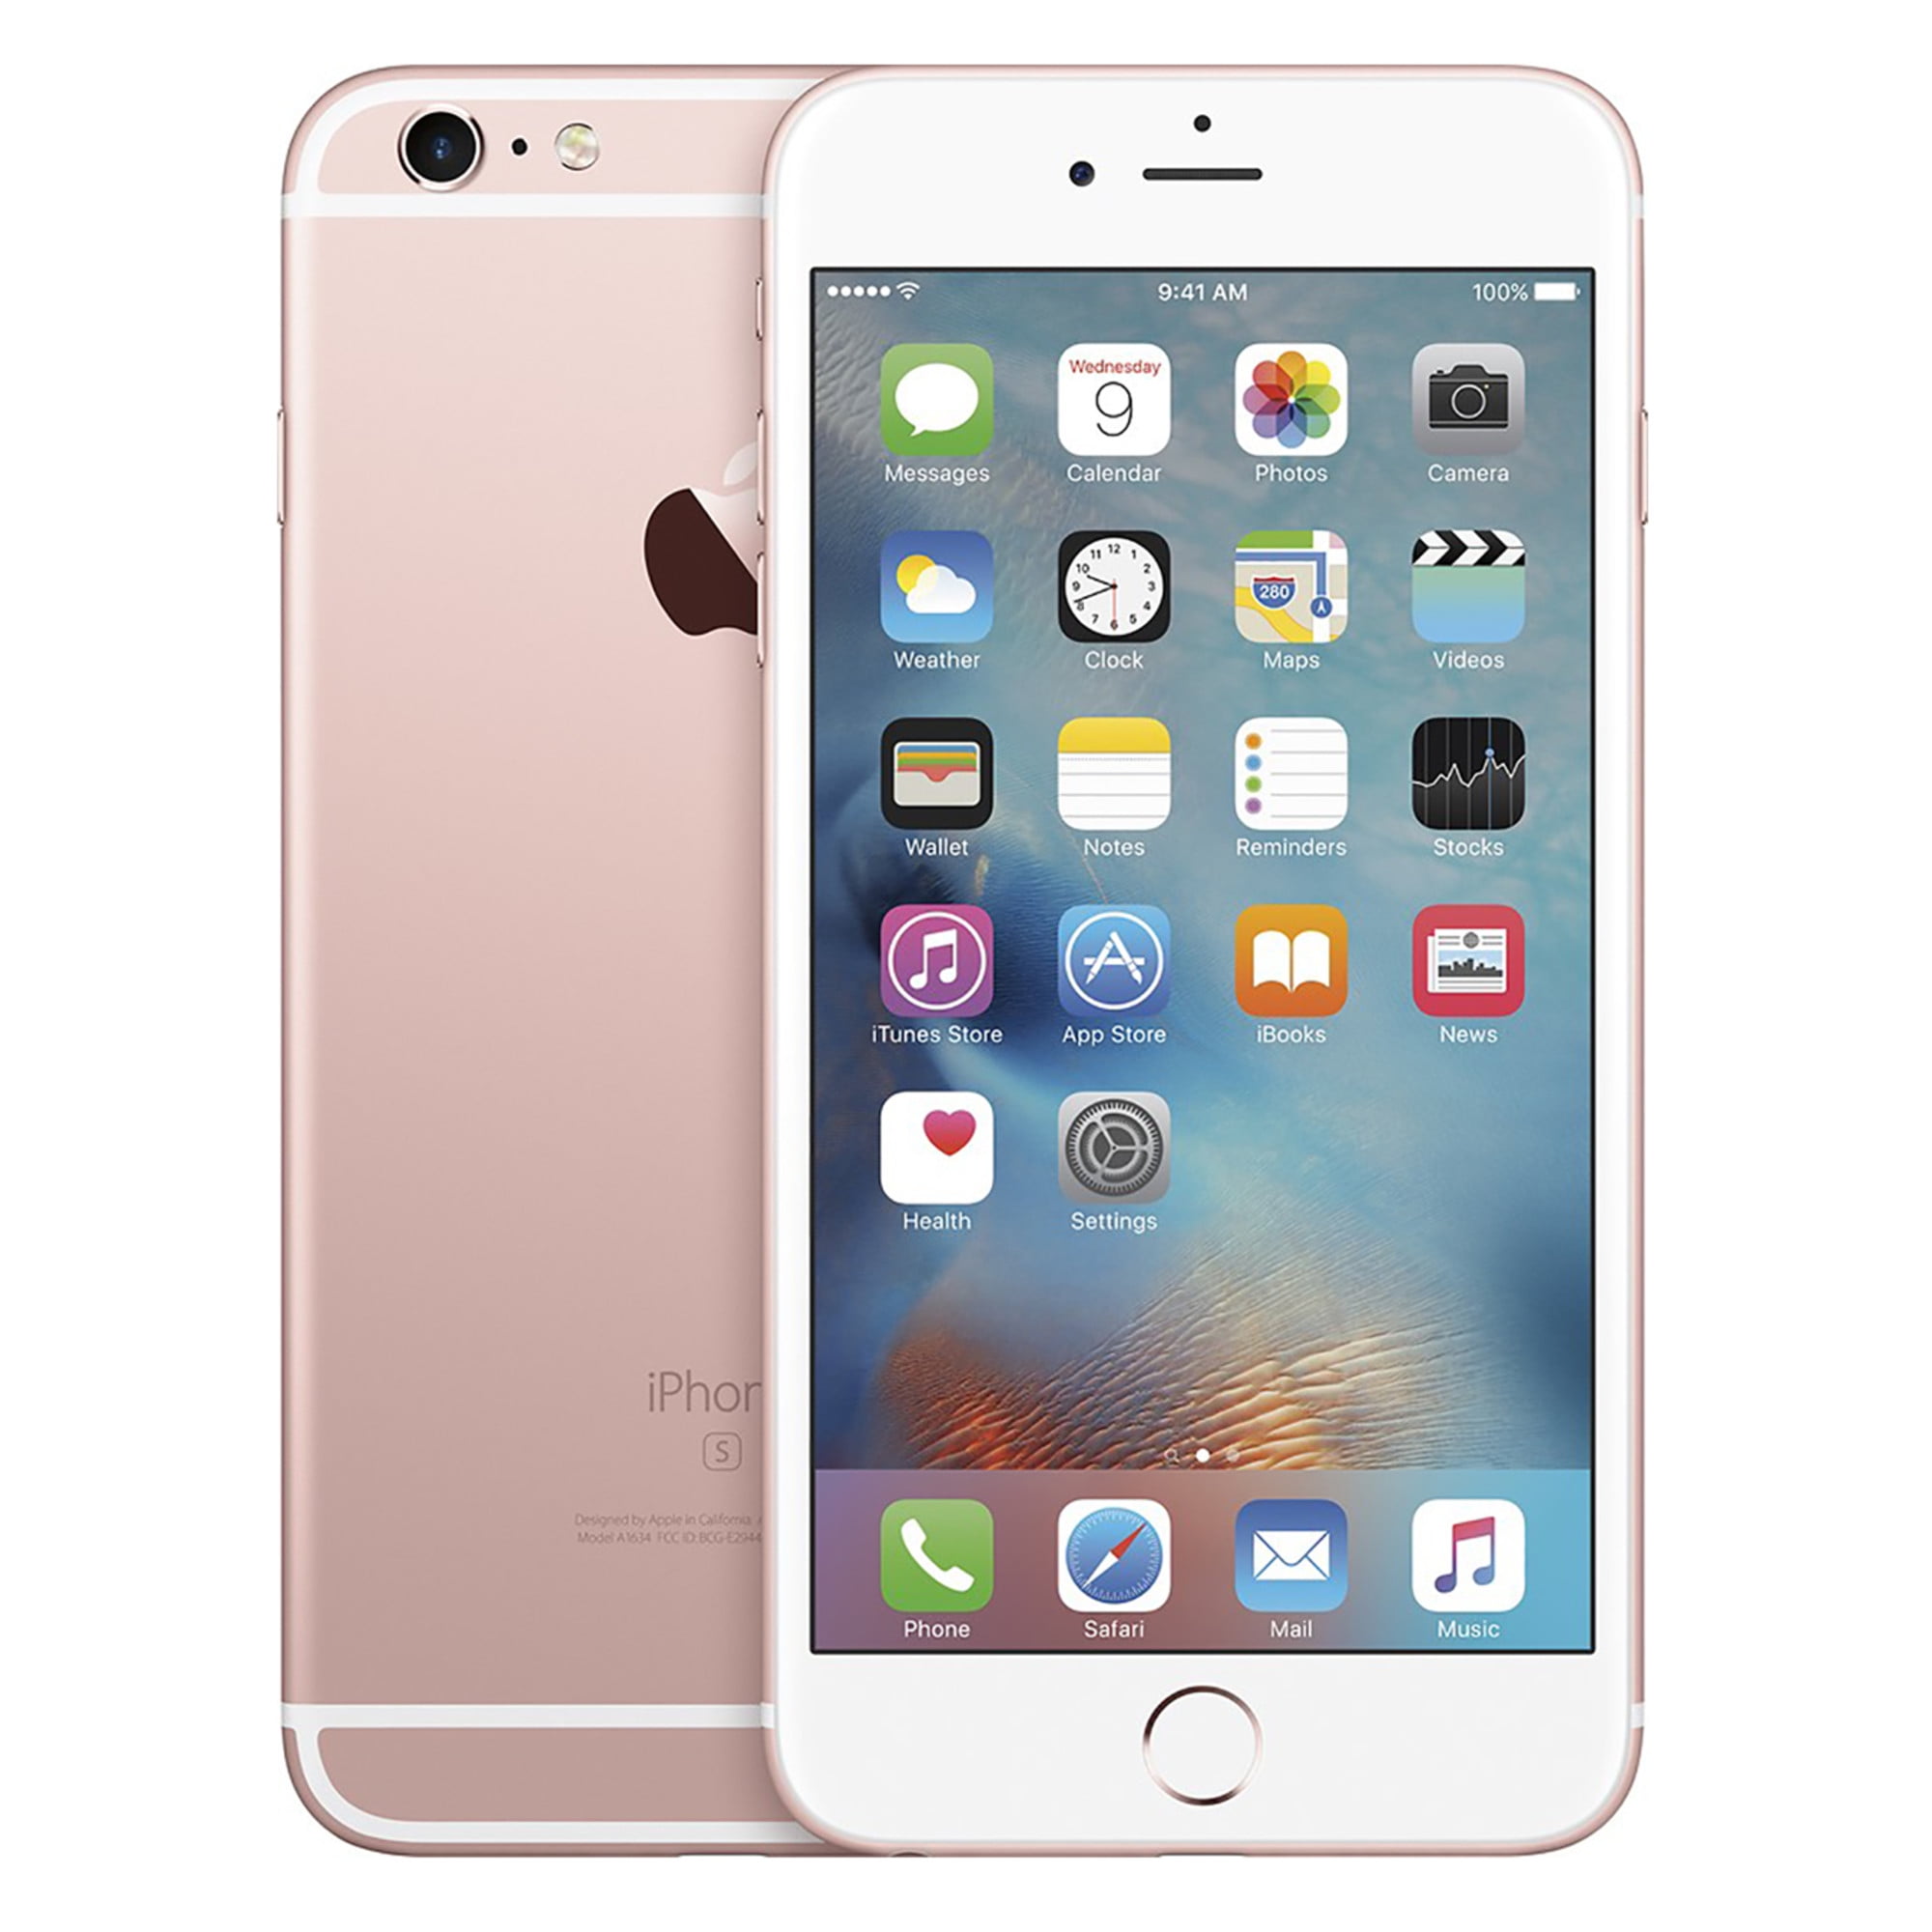 Apple iPhone 6S Plus 64GB Rose Gold LTE Cellular MKWE2LL/A 